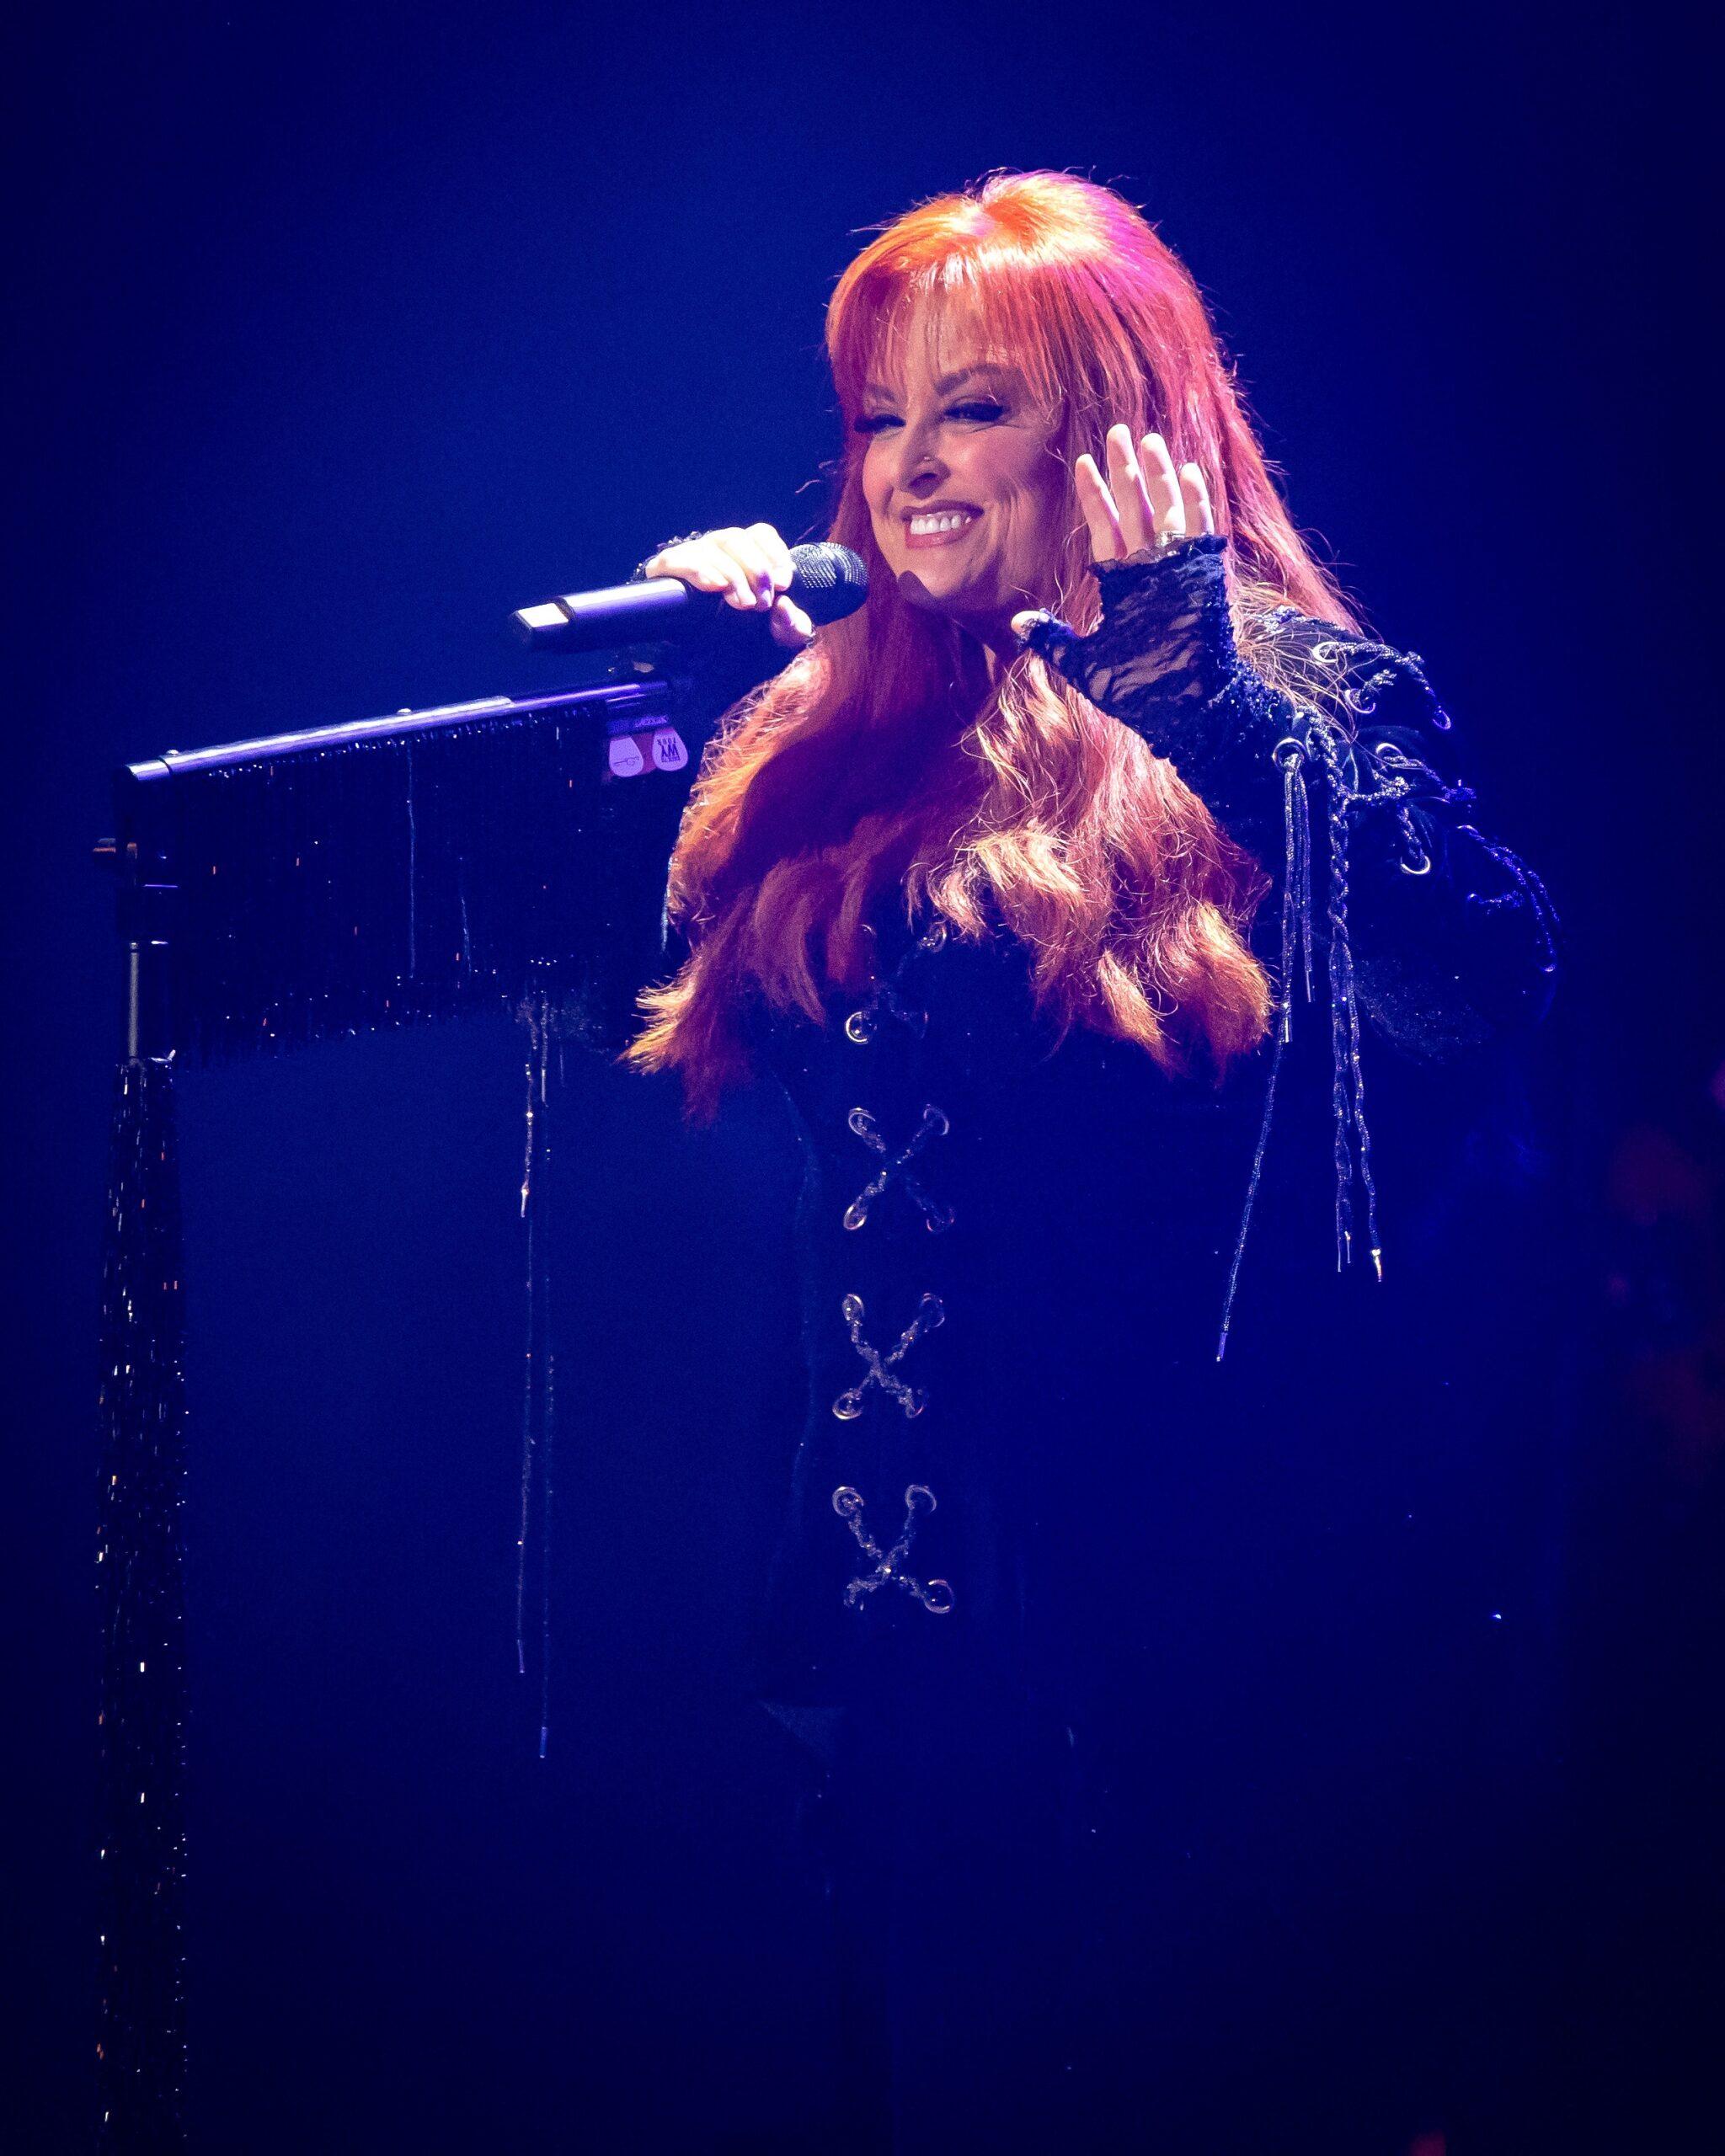 Wynonna Judd brought her ''Back to Wy'' tour to the Old National Centre in Indianapolis, Indiana on October 26, 2023.